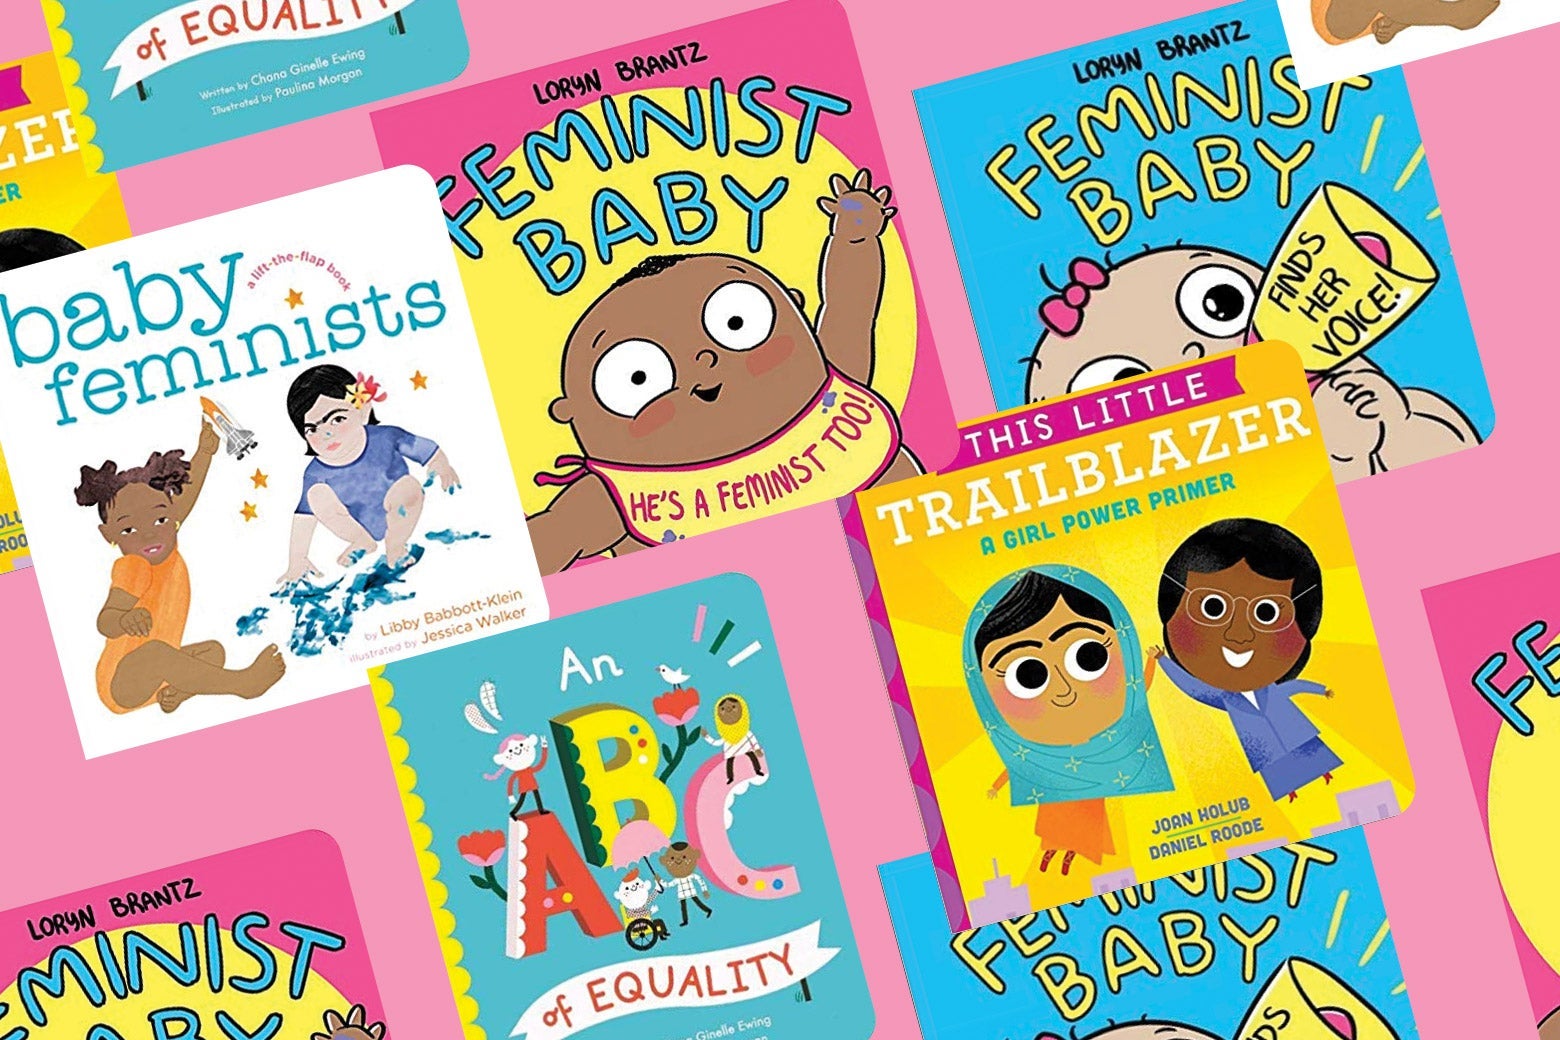 Collage of baby books: An ABC of Equality, Baby Feminists, This Little Trailblazer: A Girl Power Primer, Feminist Baby! He's a Feminist Too!, and Feminist Baby Finds Her Voice!